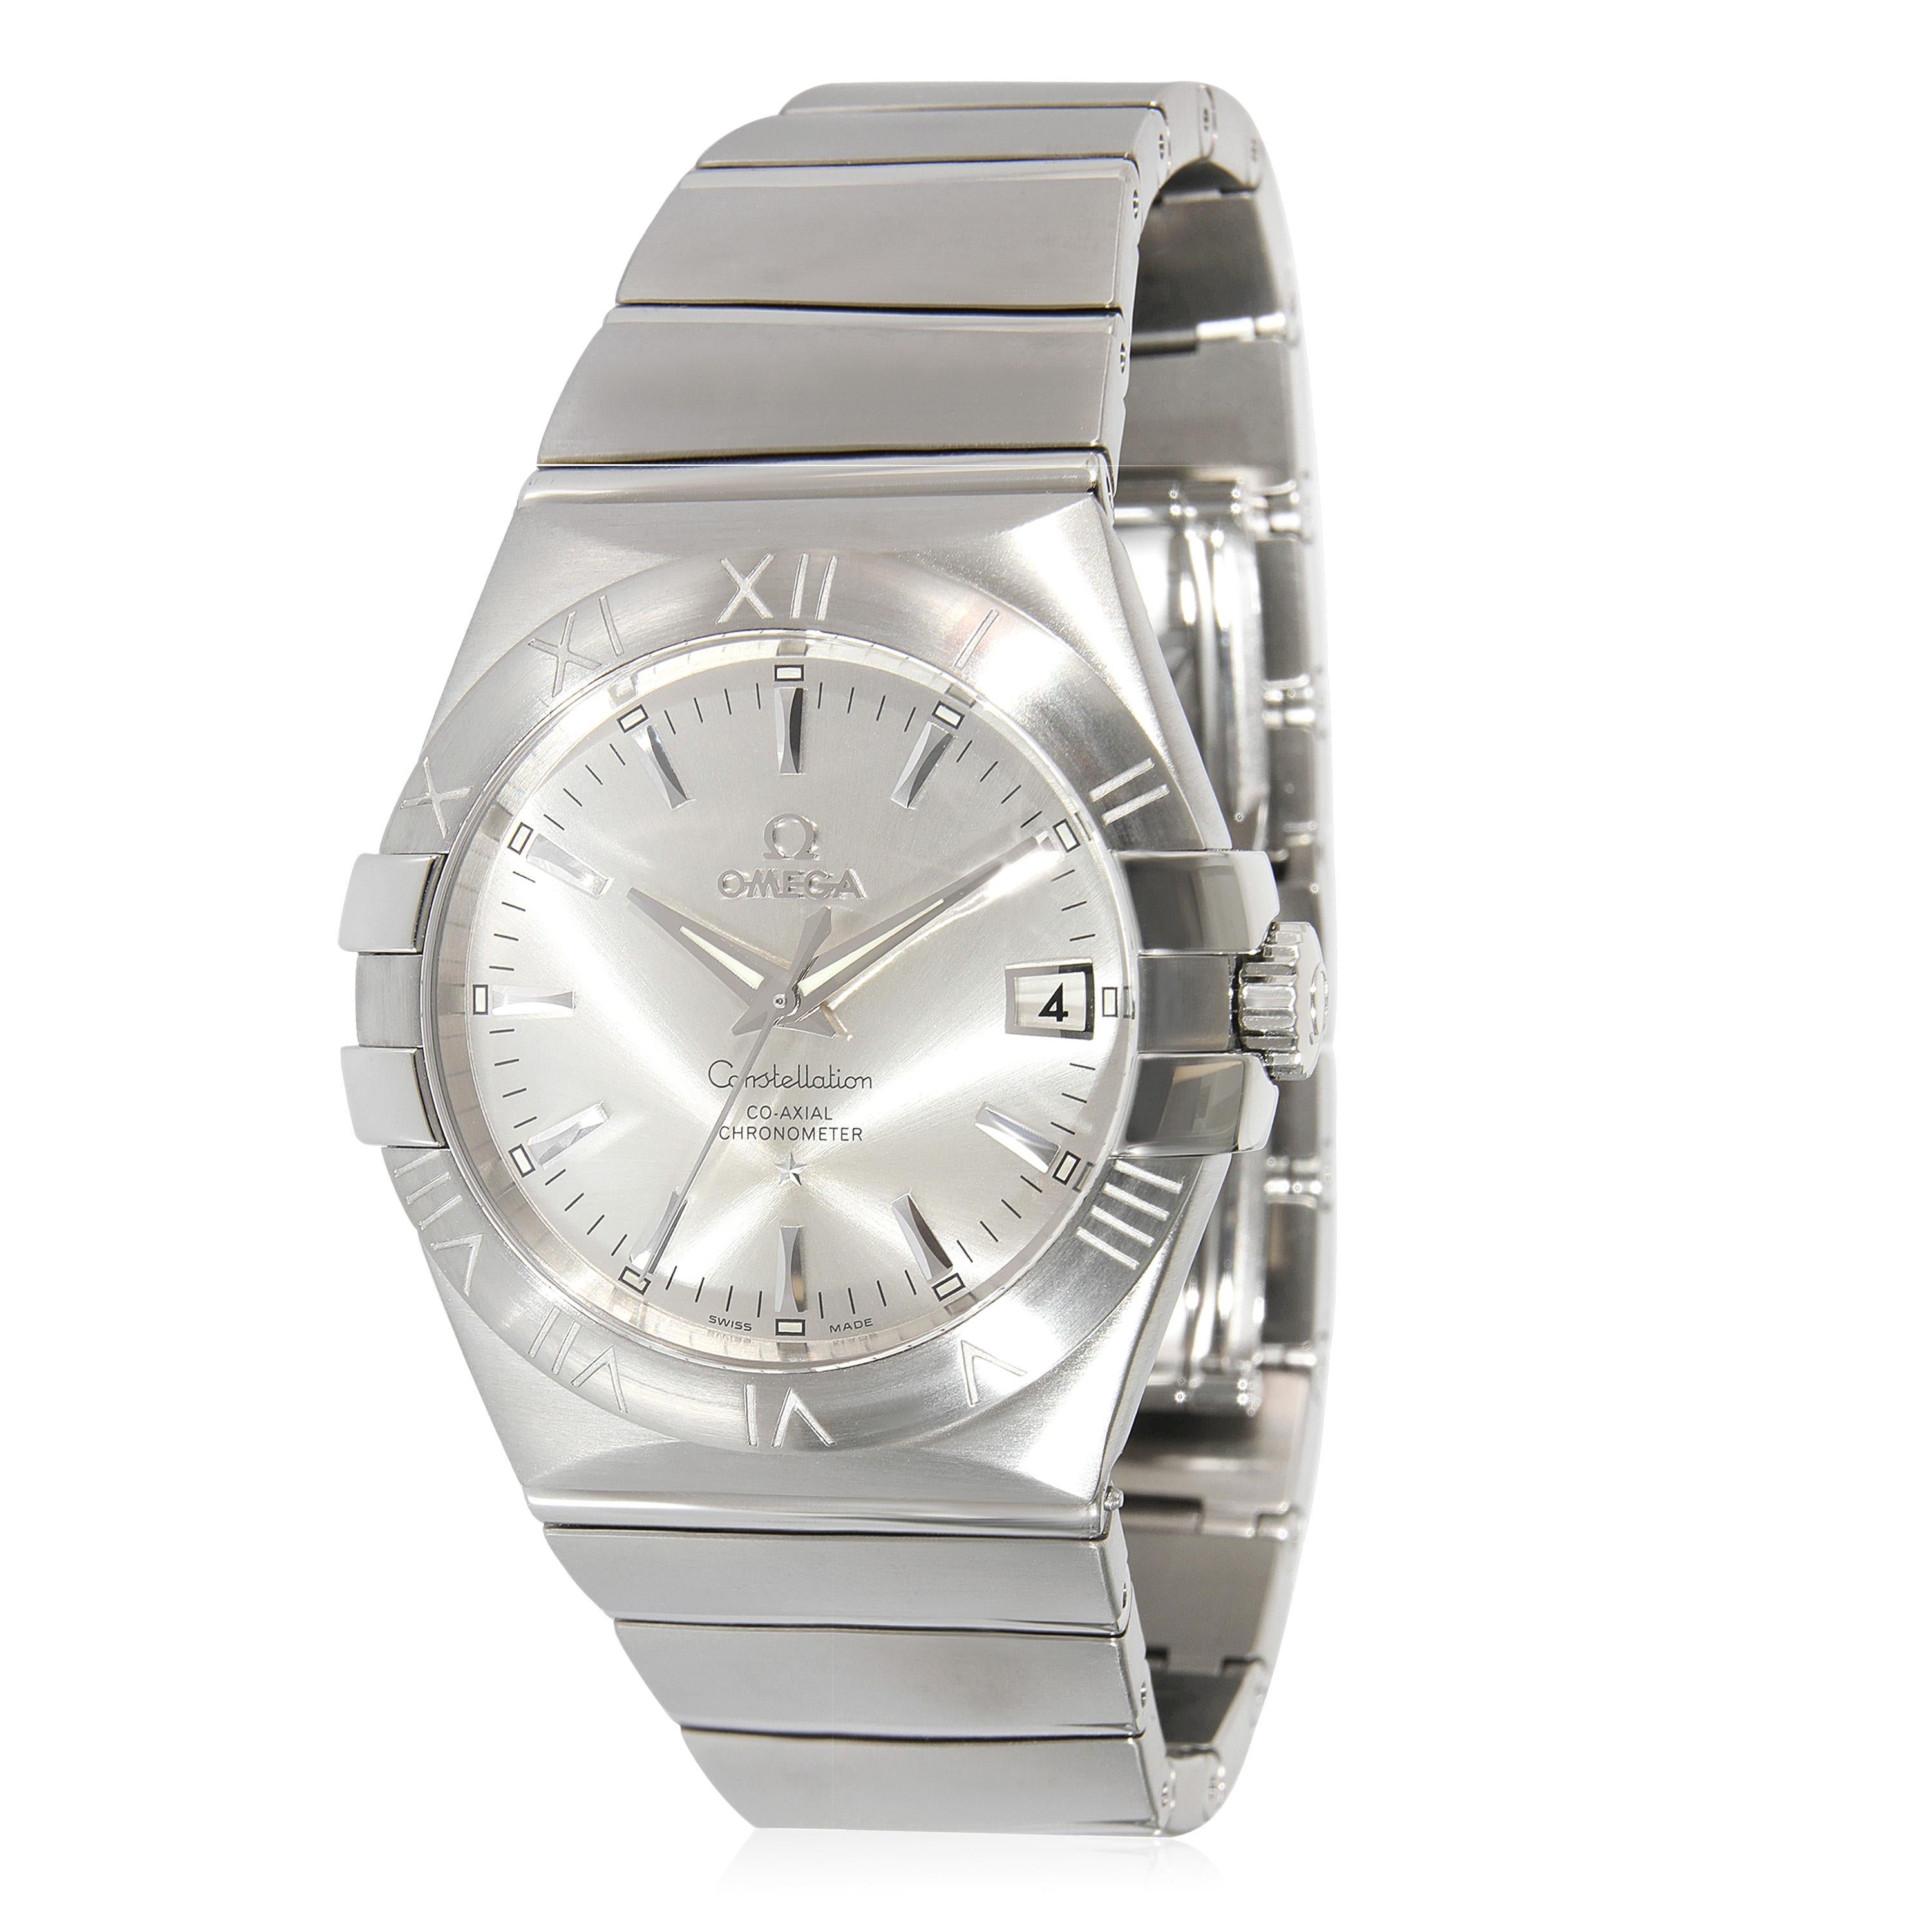 Omega Constellation 123.10.35.20.02.001 Unisex Watch in  Stainless Steel For Sale 2